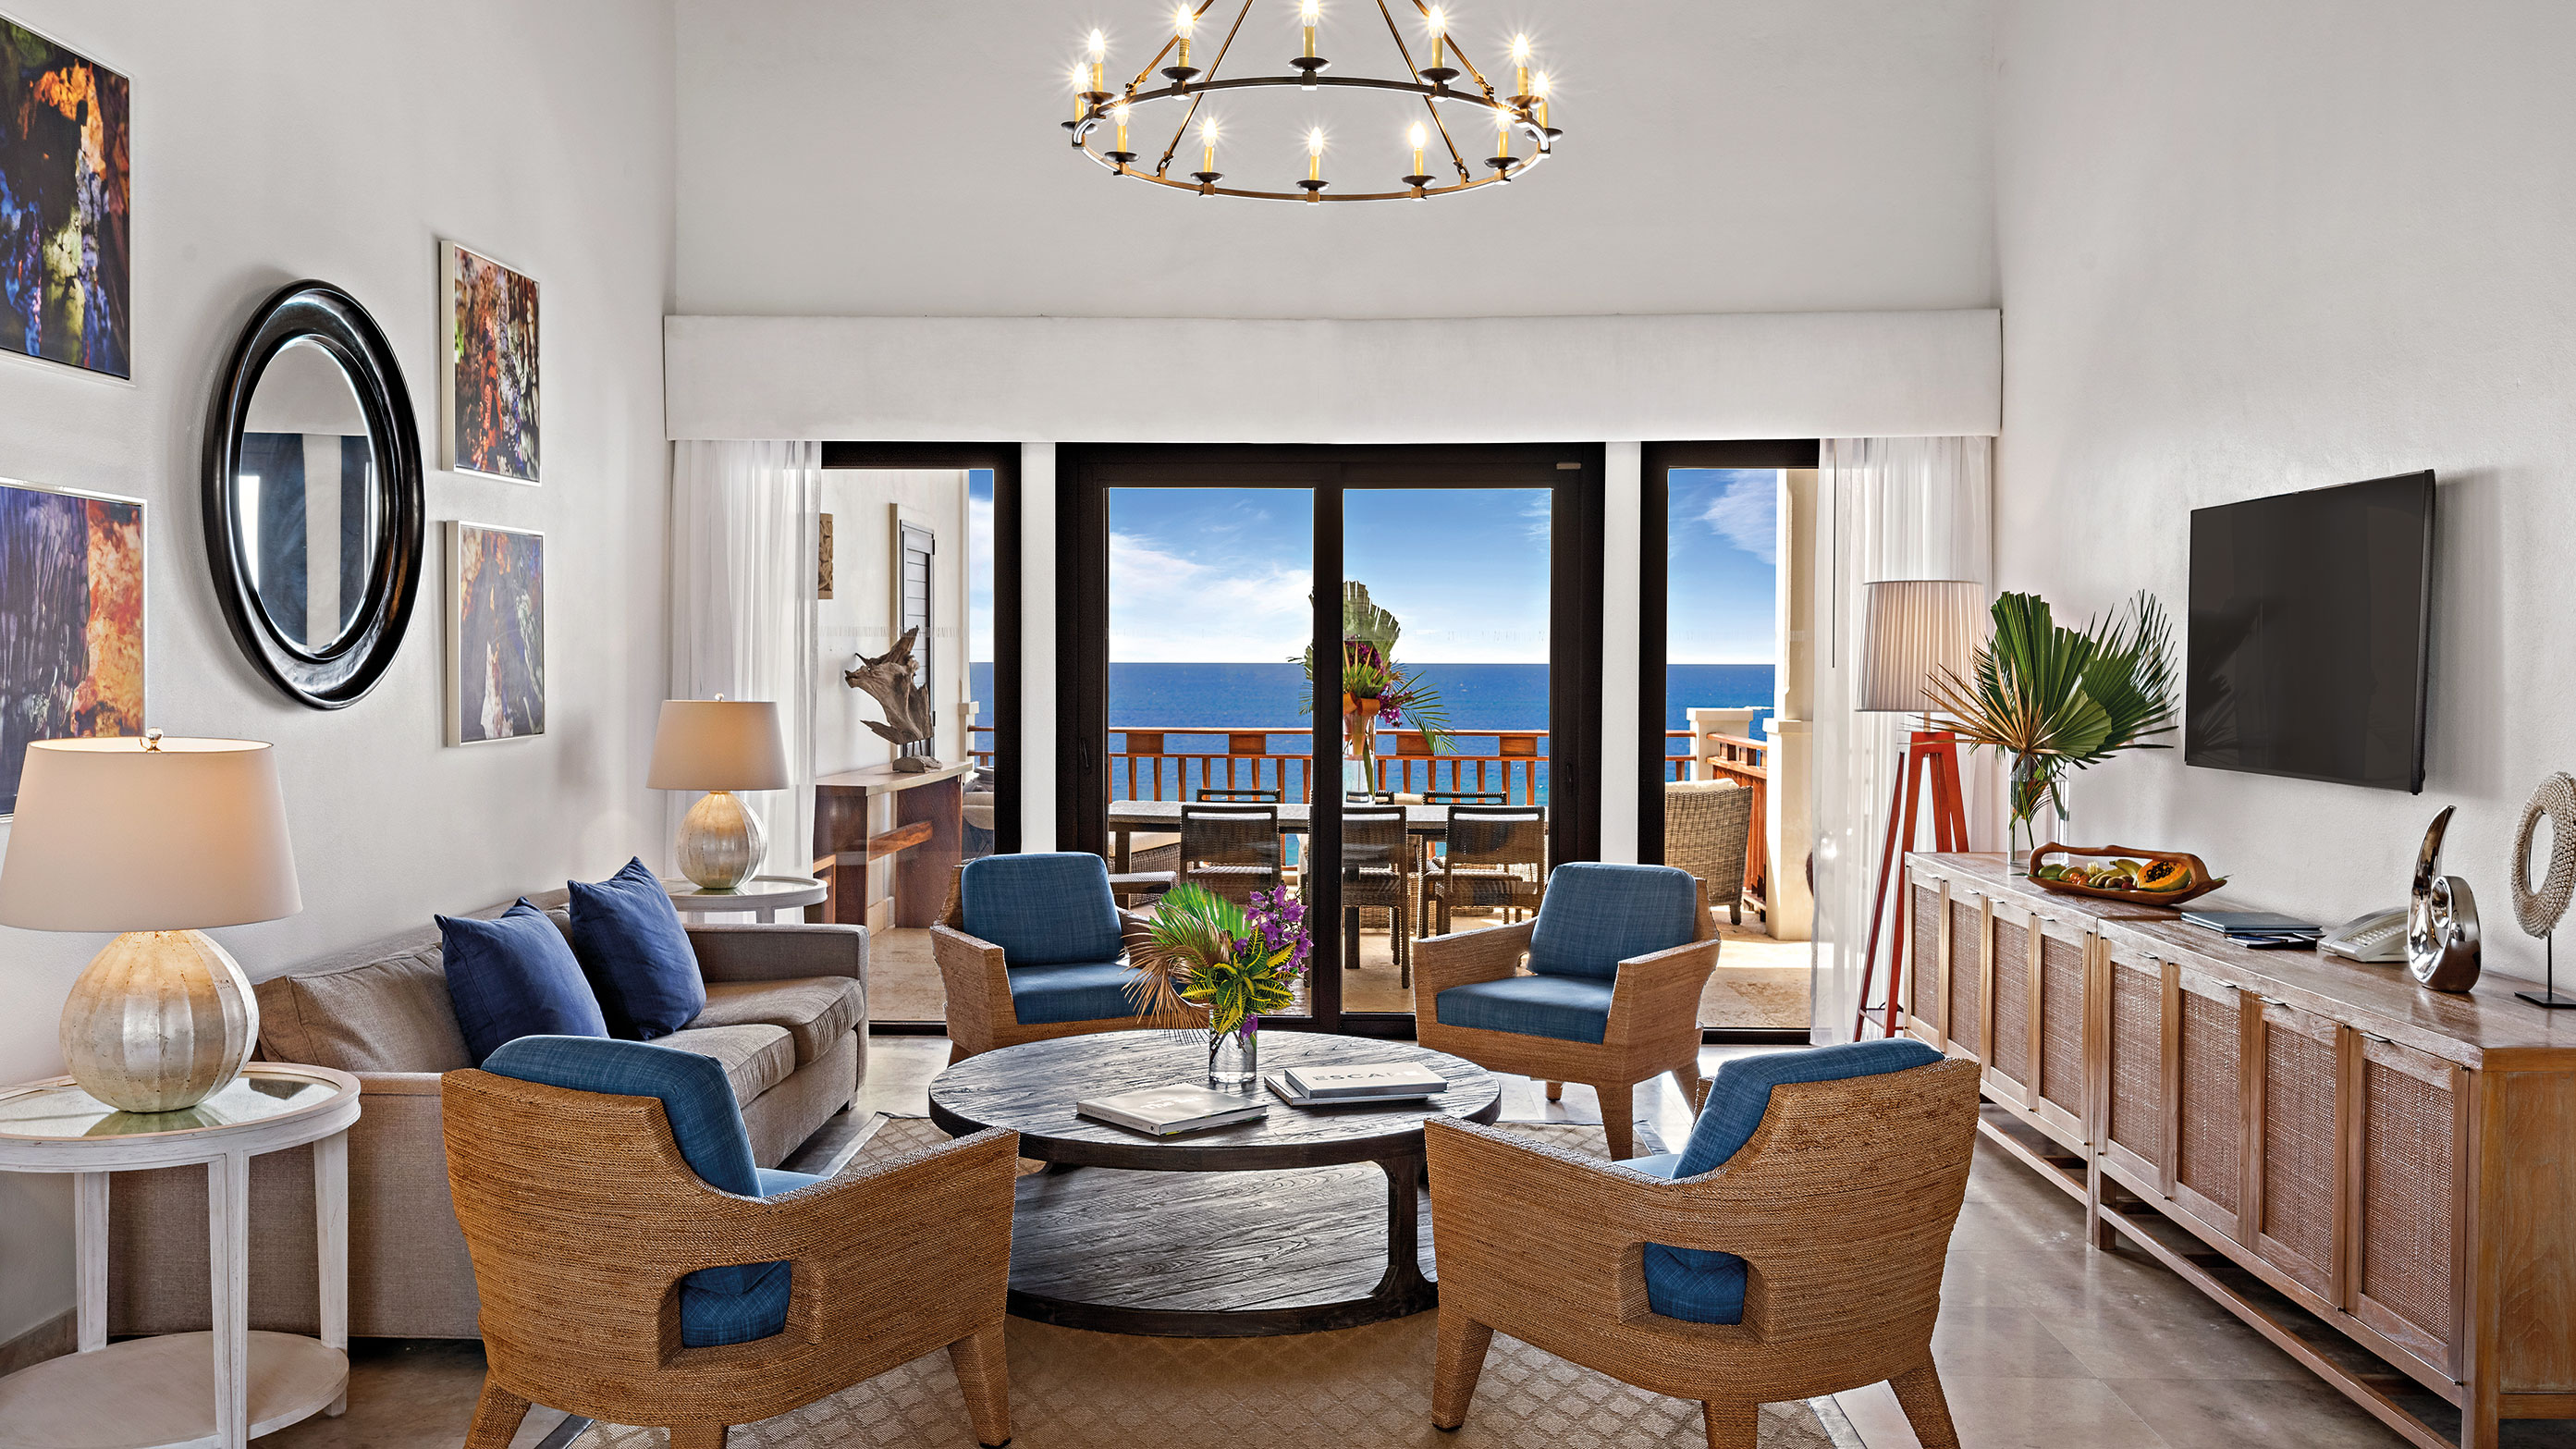 Living room with table and chairs, TV, and view of ocean from balcony